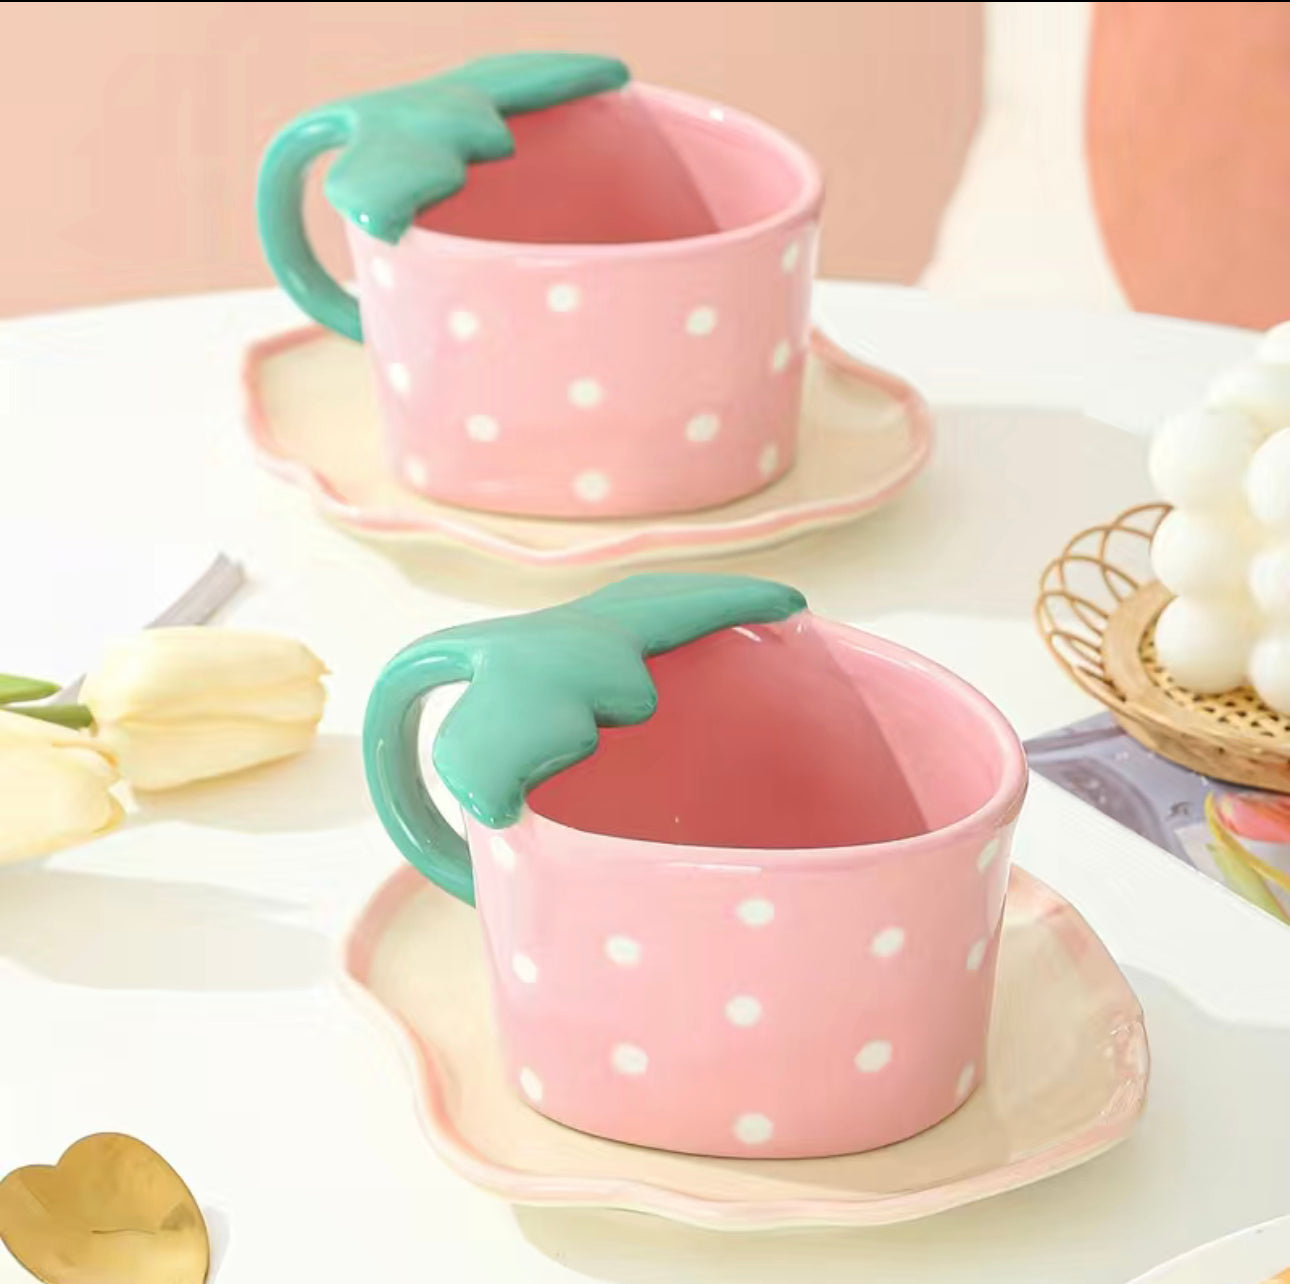 Kawaii Pink Strawberry Ceramic Coffee Cup & Saucer Set - Perfect Gift for Coffee Lovers!